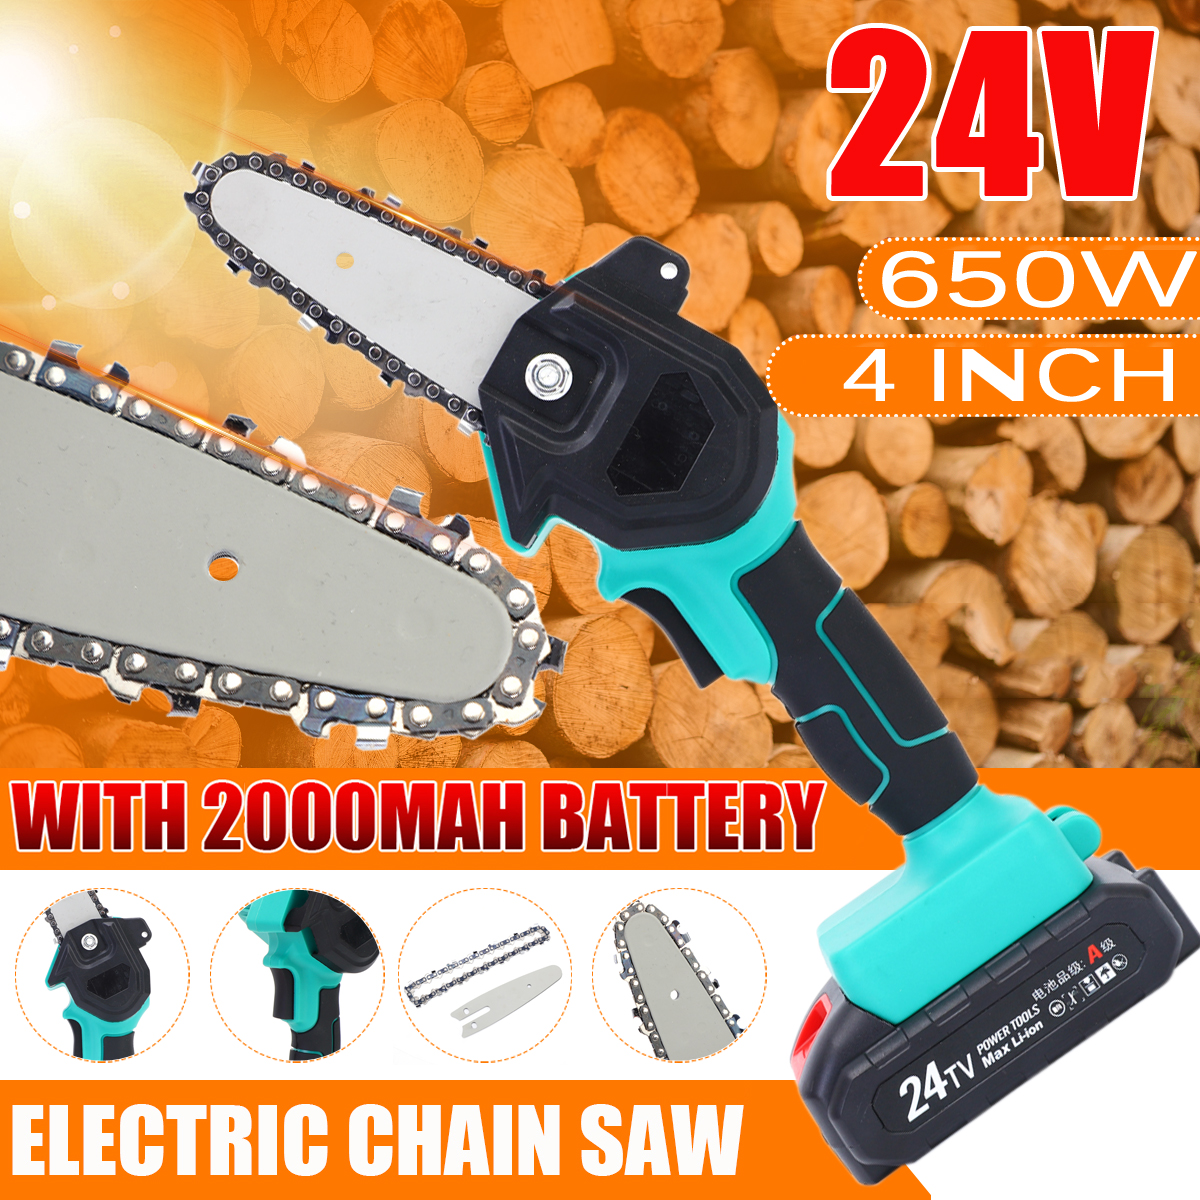 110V-Mini-Chainsaw-Cordless-Electric-Portable-Saw-Hand-held-Rechargeable-Electric-Logging-Saw-With-B-1789278-1